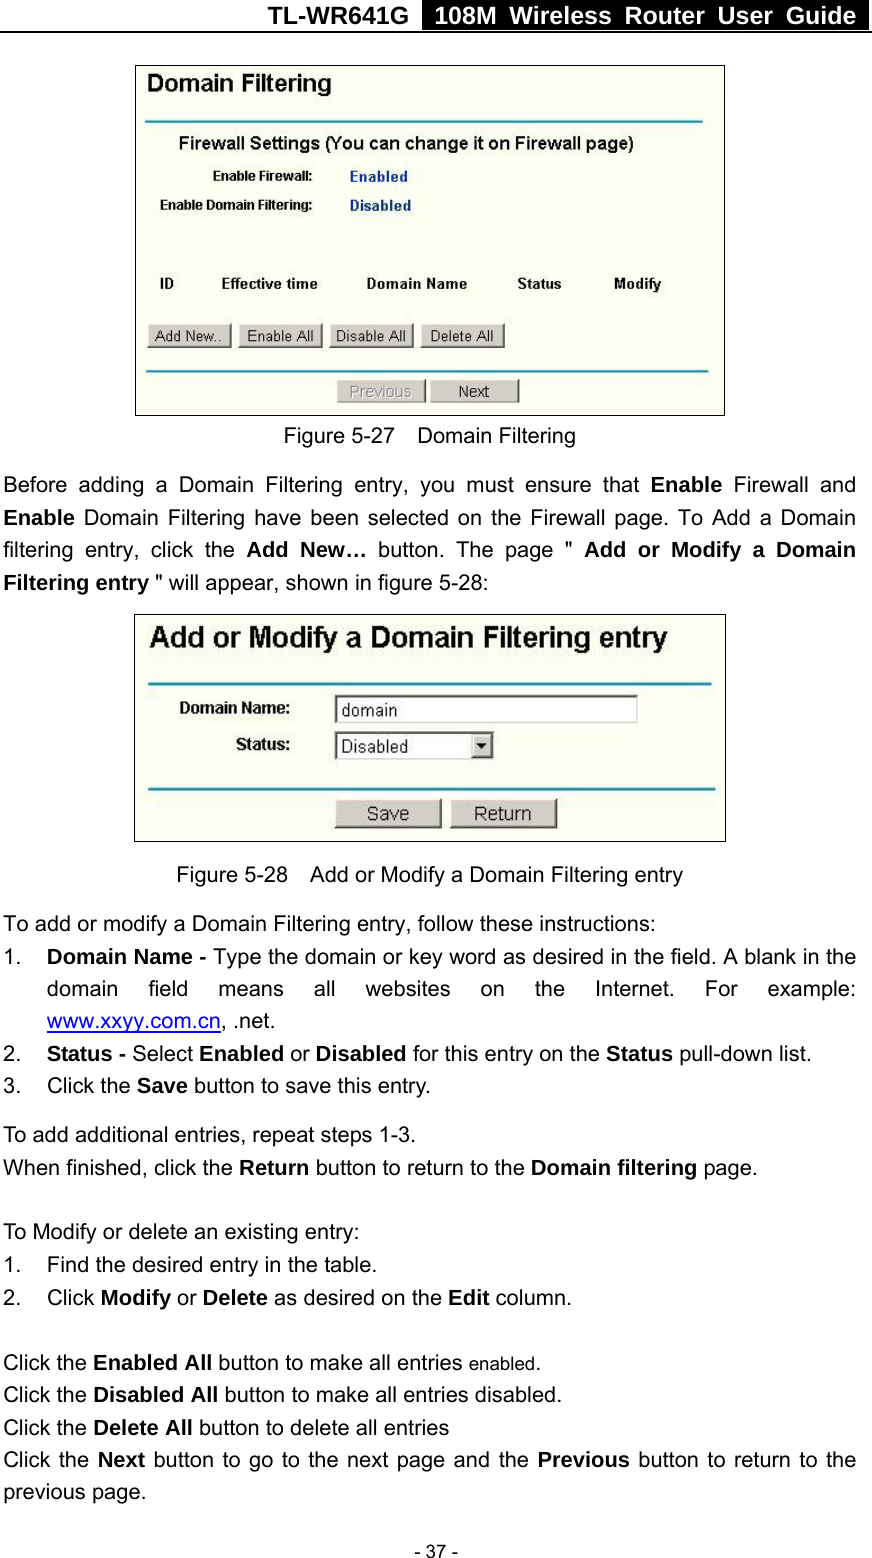 TL-WR641G   108M Wireless Router User Guide   - 37 - Figure 5-27  Domain Filtering Before adding a Domain Filtering entry, you must ensure that Enable Firewall and Enable Domain Filtering have been selected on the Firewall page. To Add a Domain filtering entry, click the Add New… button. The page &quot; Add or Modify a Domain Filtering entry &quot; will appear, shown in figure 5-28:  Figure 5-28    Add or Modify a Domain Filtering entry To add or modify a Domain Filtering entry, follow these instructions: 1.  Domain Name - Type the domain or key word as desired in the field. A blank in the domain field means all websites on the Internet. For example: www.xxyy.com.cn, .net. 2.  Status - Select Enabled or Disabled for this entry on the Status pull-down list. 3. Click the Save button to save this entry. To add additional entries, repeat steps 1-3. When finished, click the Return button to return to the Domain filtering page.  To Modify or delete an existing entry: 1.  Find the desired entry in the table. 2. Click Modify or Delete as desired on the Edit column.  Click the Enabled All button to make all entries enabled. Click the Disabled All button to make all entries disabled. Click the Delete All button to delete all entries Click the Next button to go to the next page and the Previous button to return to the previous page. 